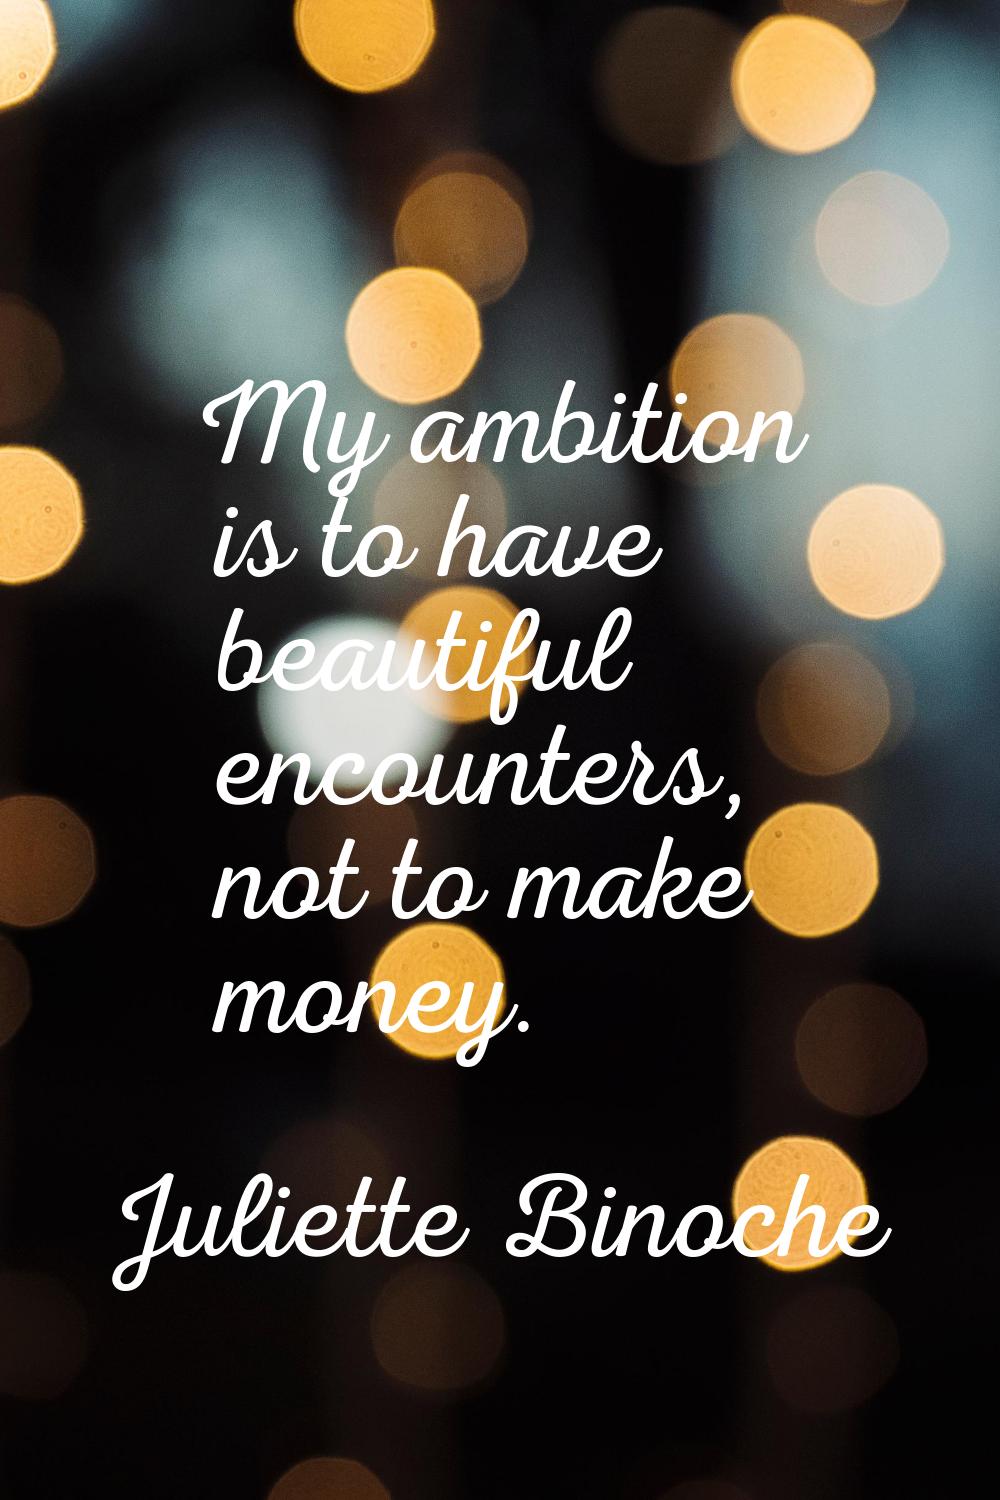 My ambition is to have beautiful encounters, not to make money.